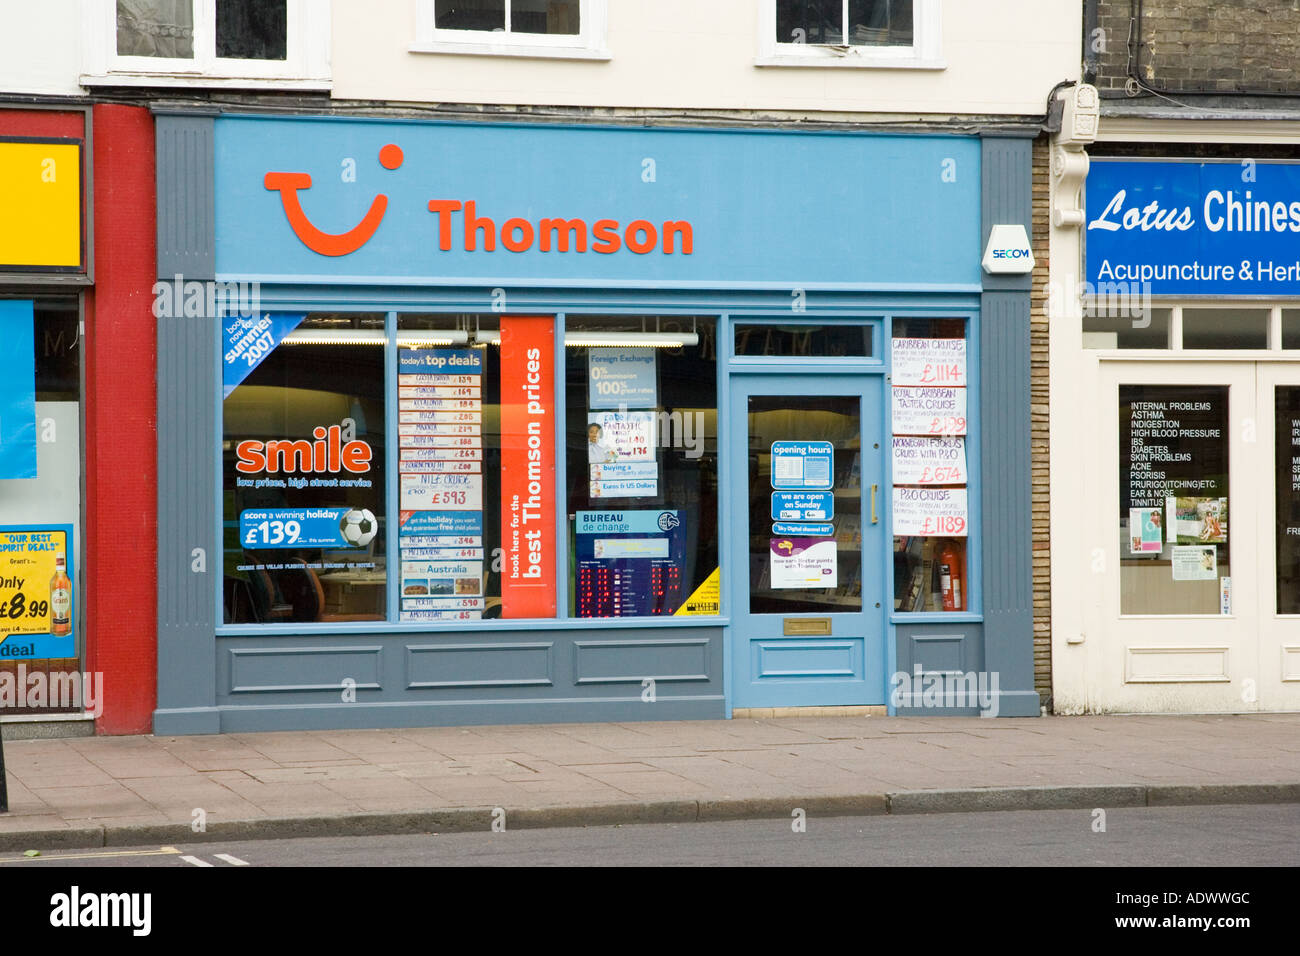 Thomson travel agent shop in Bury St Edmunds in Suffolk, UK Stock Photo